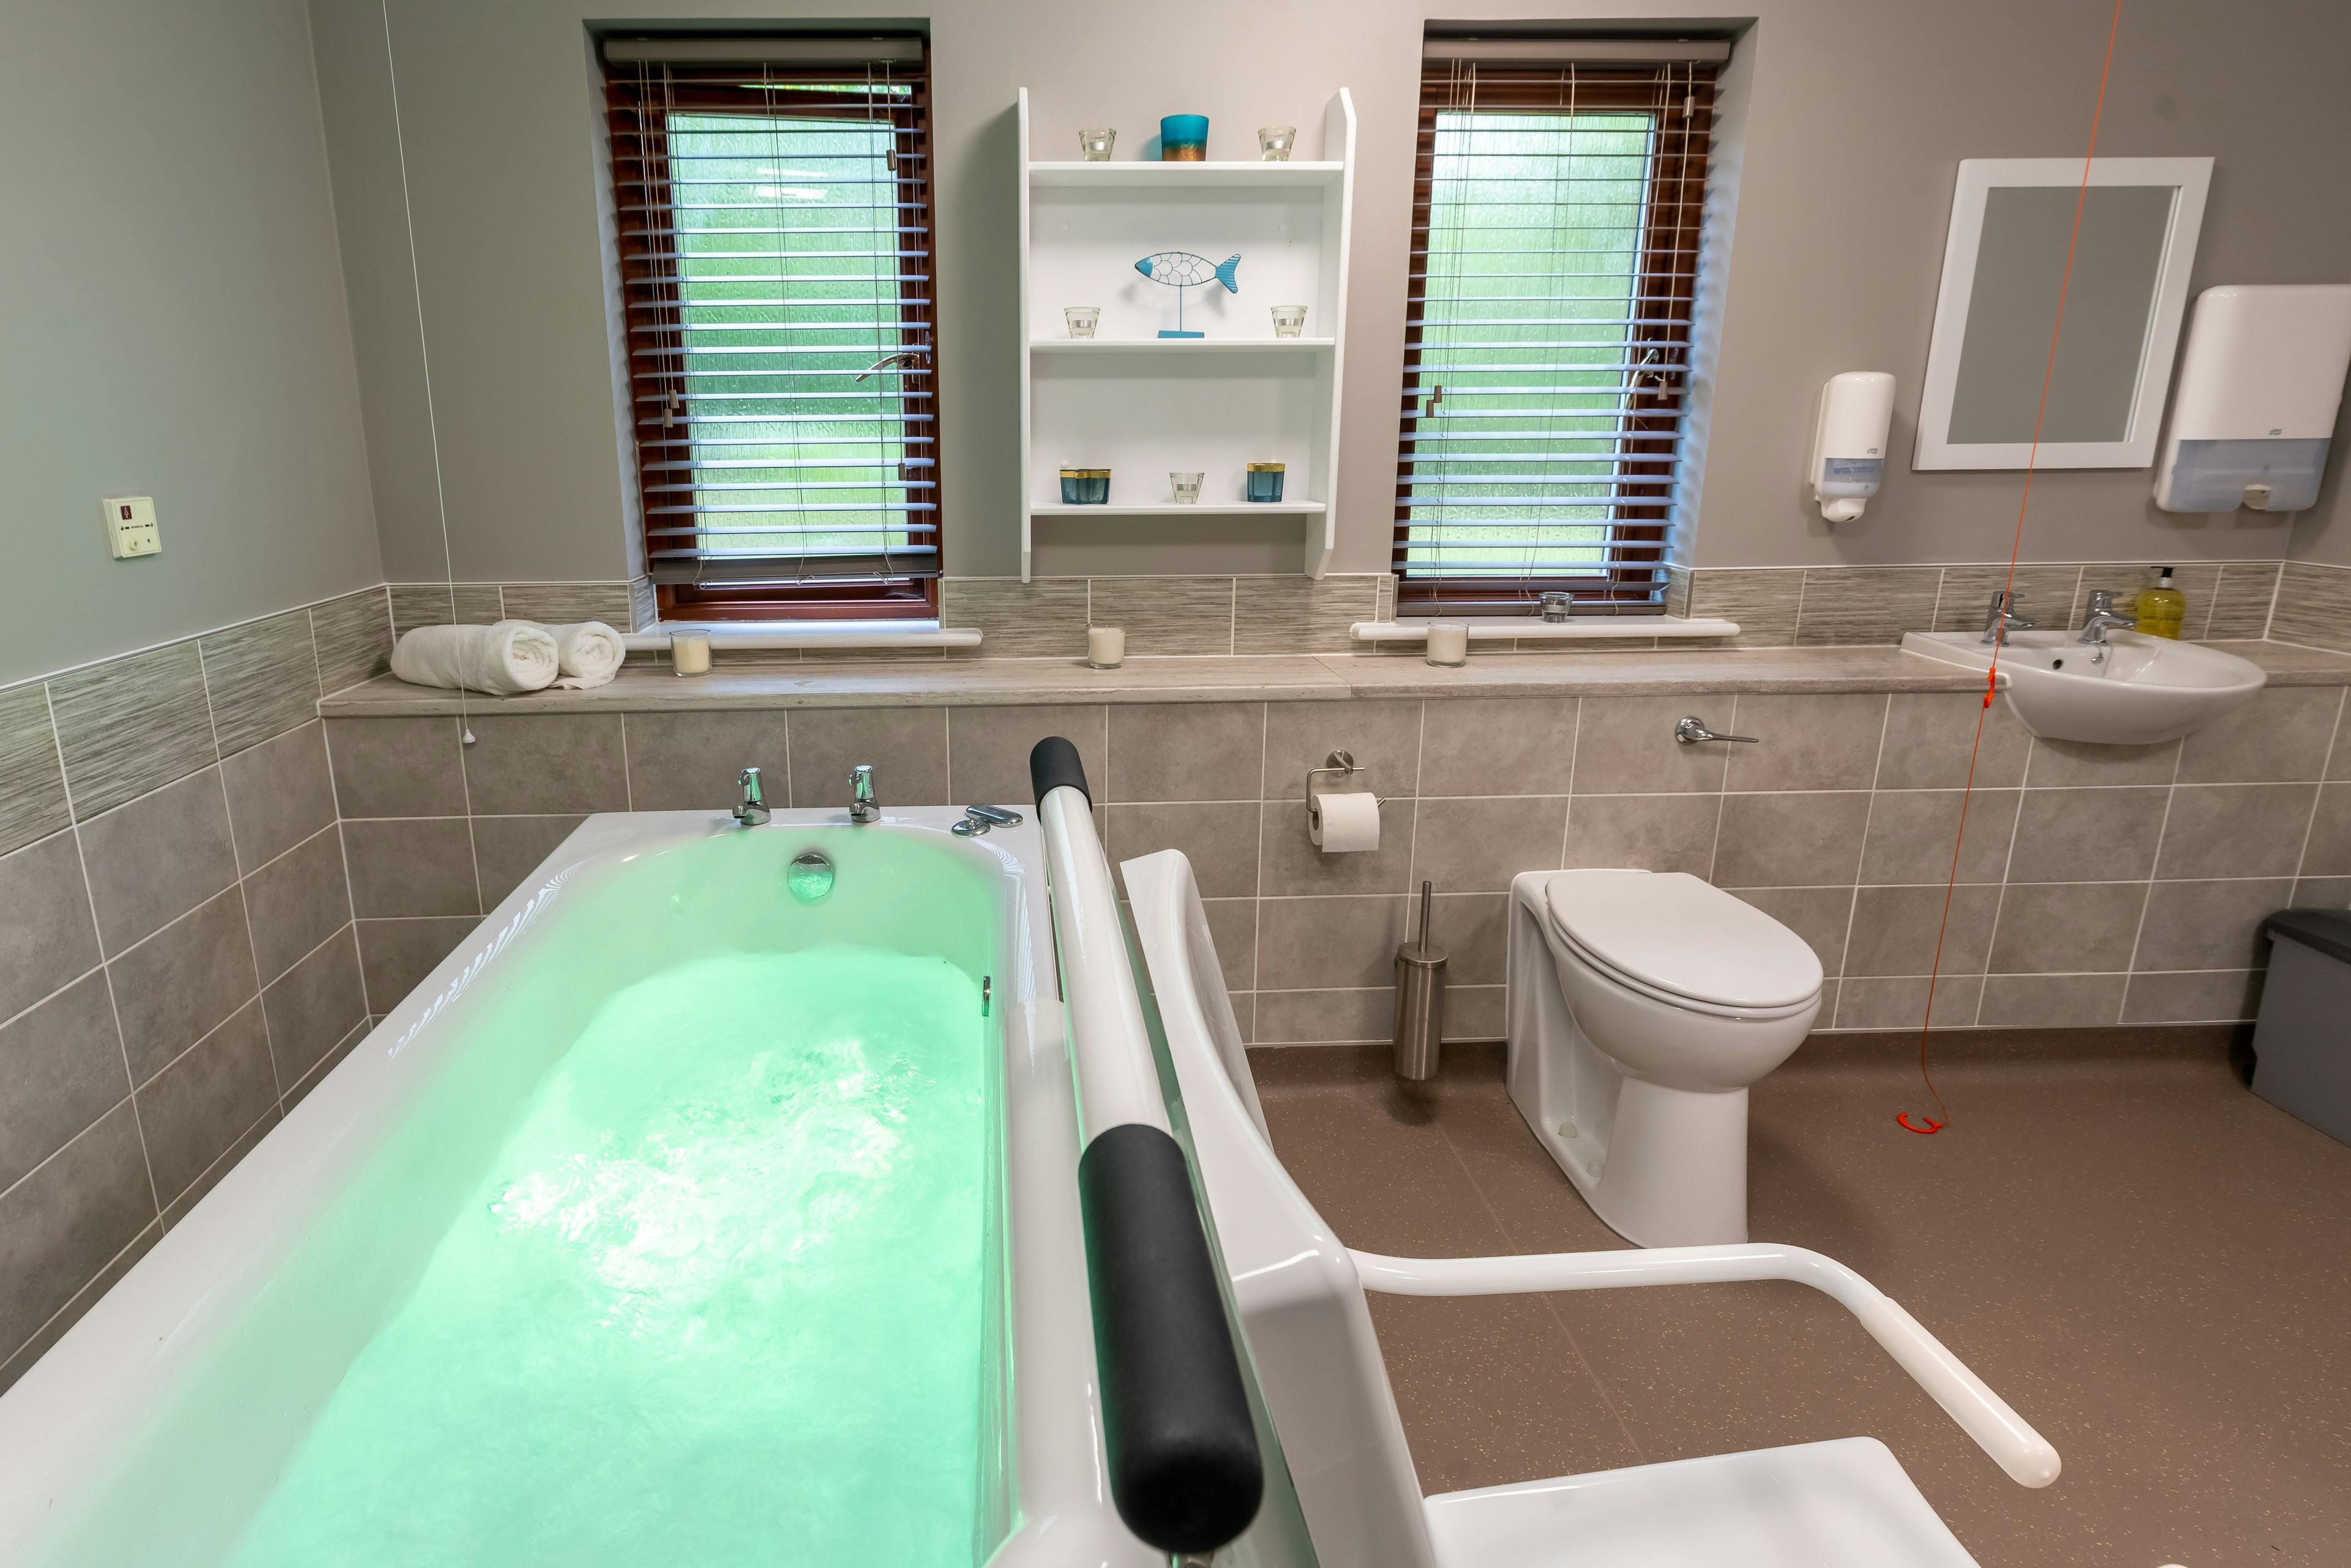 Spa Bathroom at Tandridge Heights Care Home in Oxted, Surrey